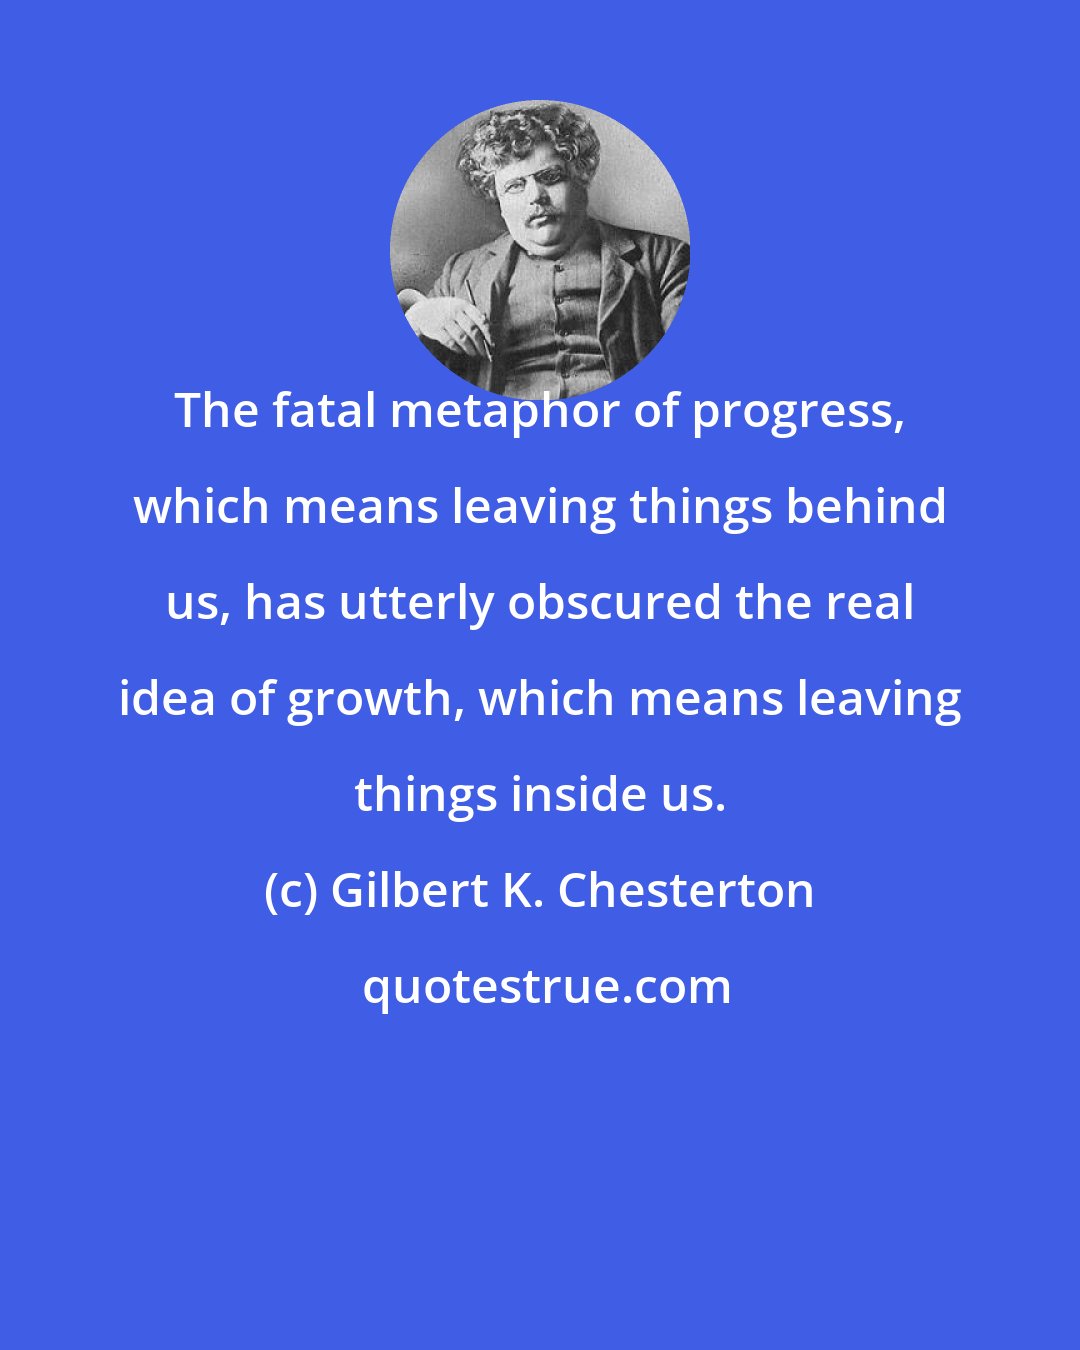 Gilbert K. Chesterton: The fatal metaphor of progress, which means leaving things behind us, has utterly obscured the real idea of growth, which means leaving things inside us.